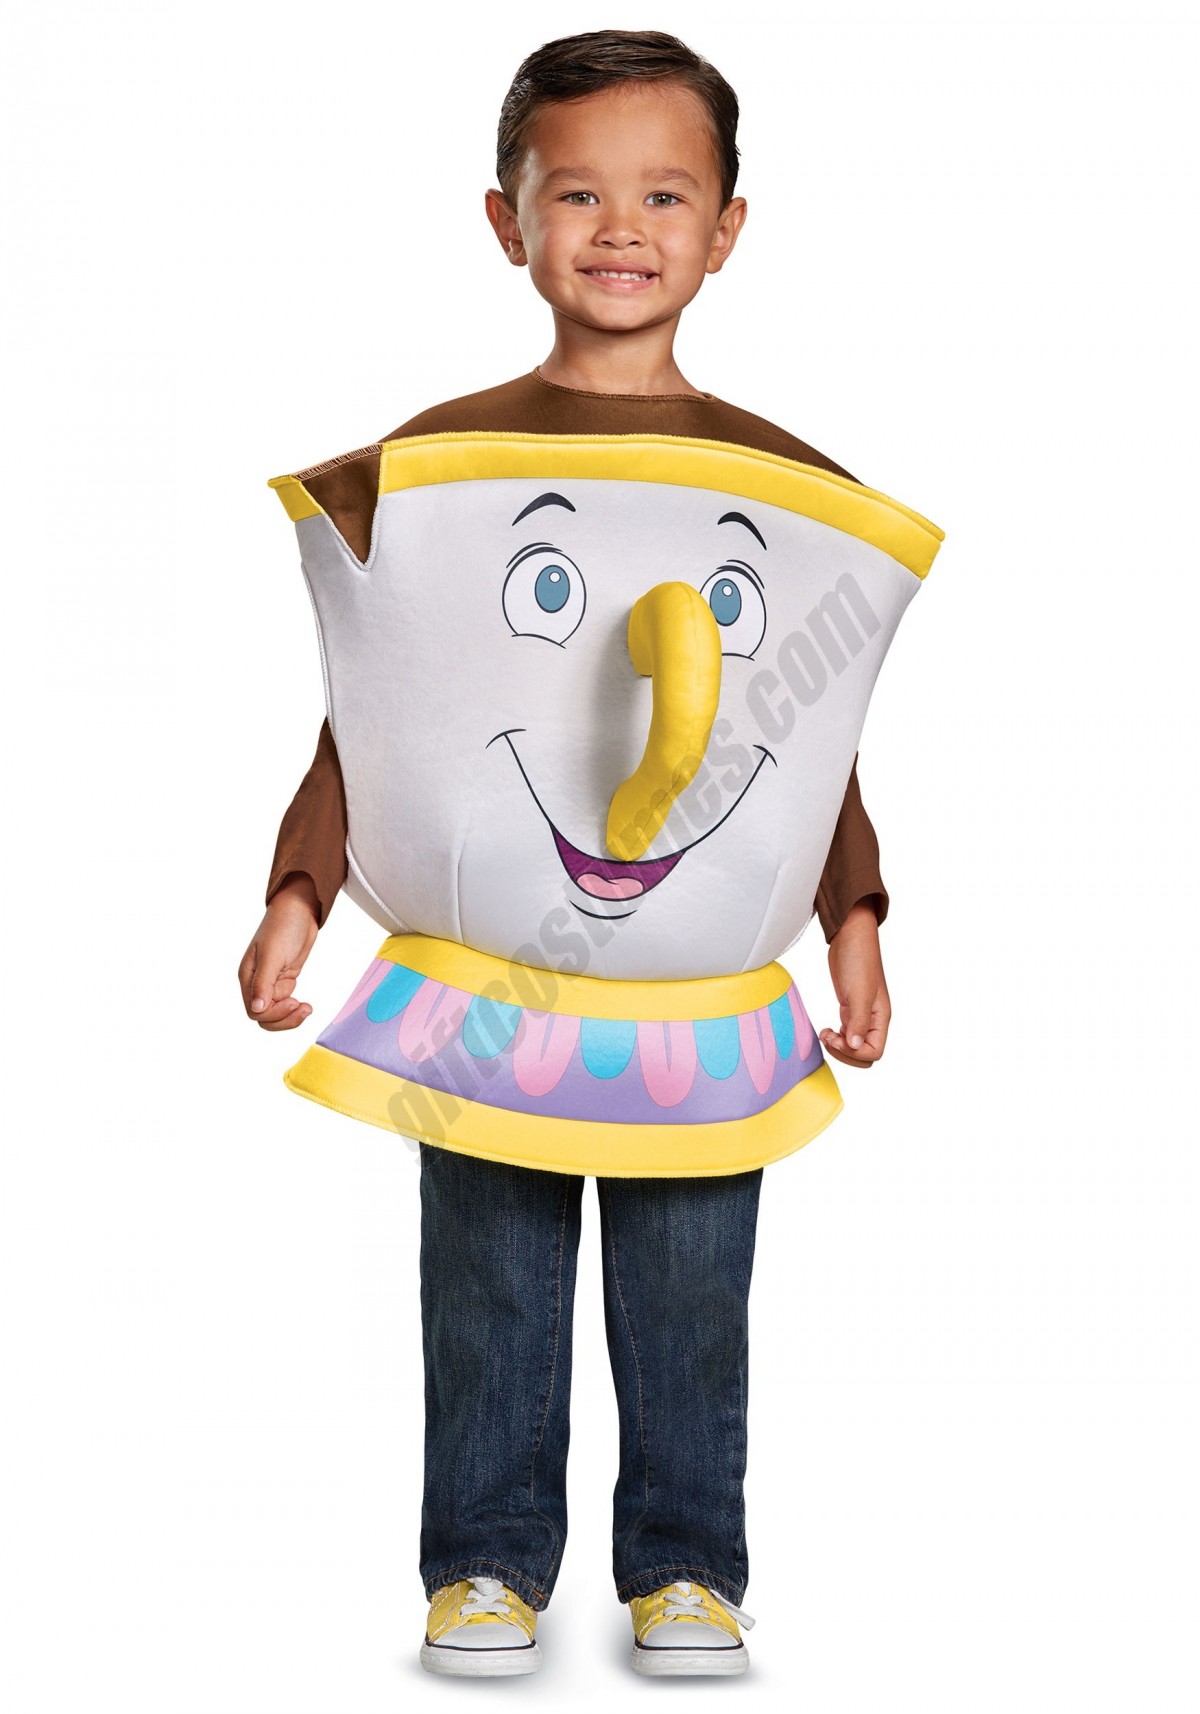 Deluxe Chip Costume for Toddlers Promotions - -0